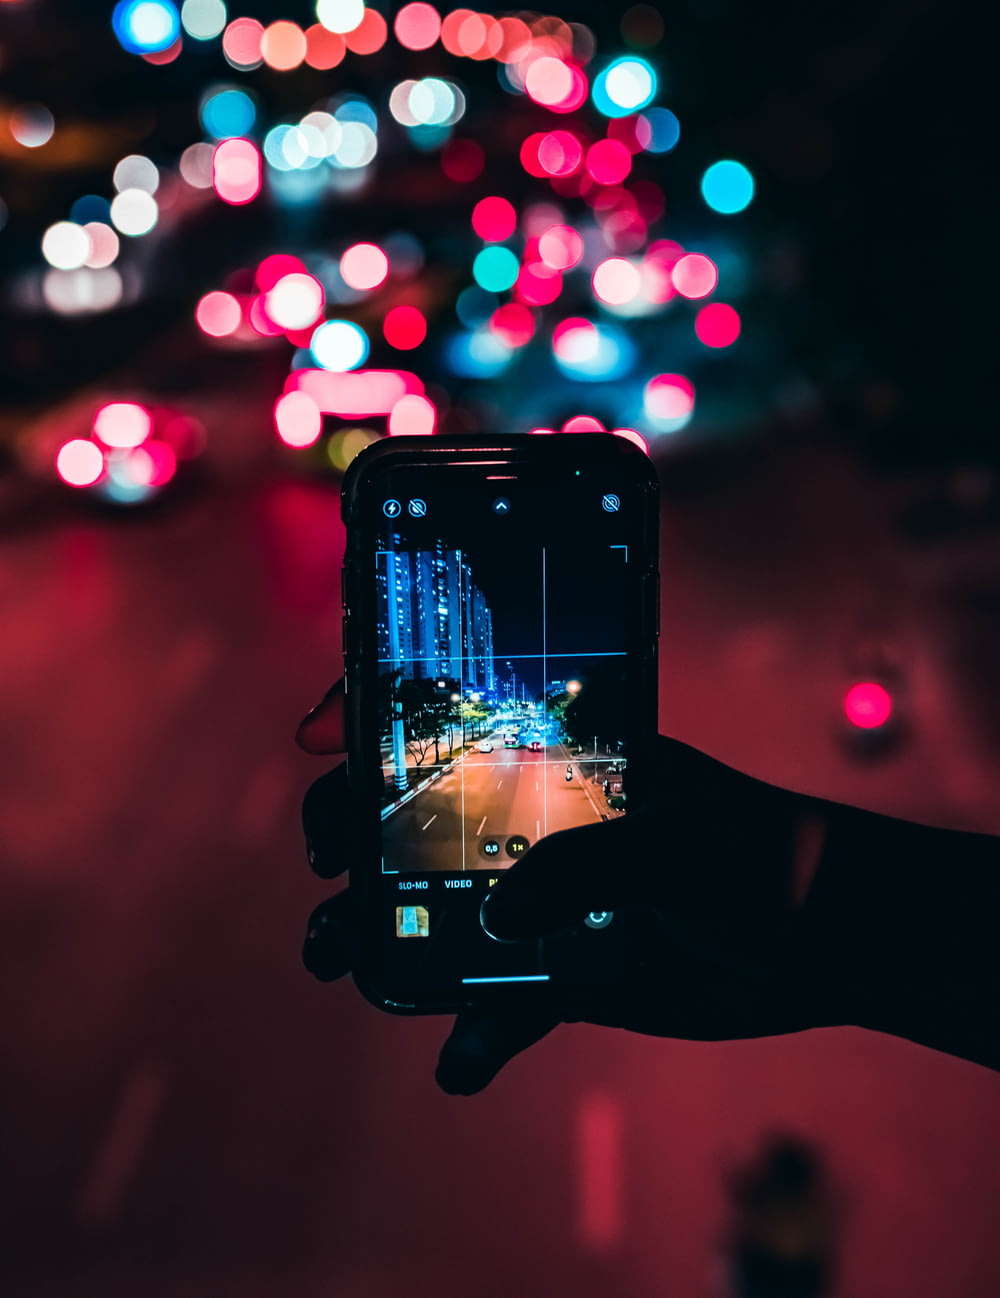 a person taking a picture of a city street at night